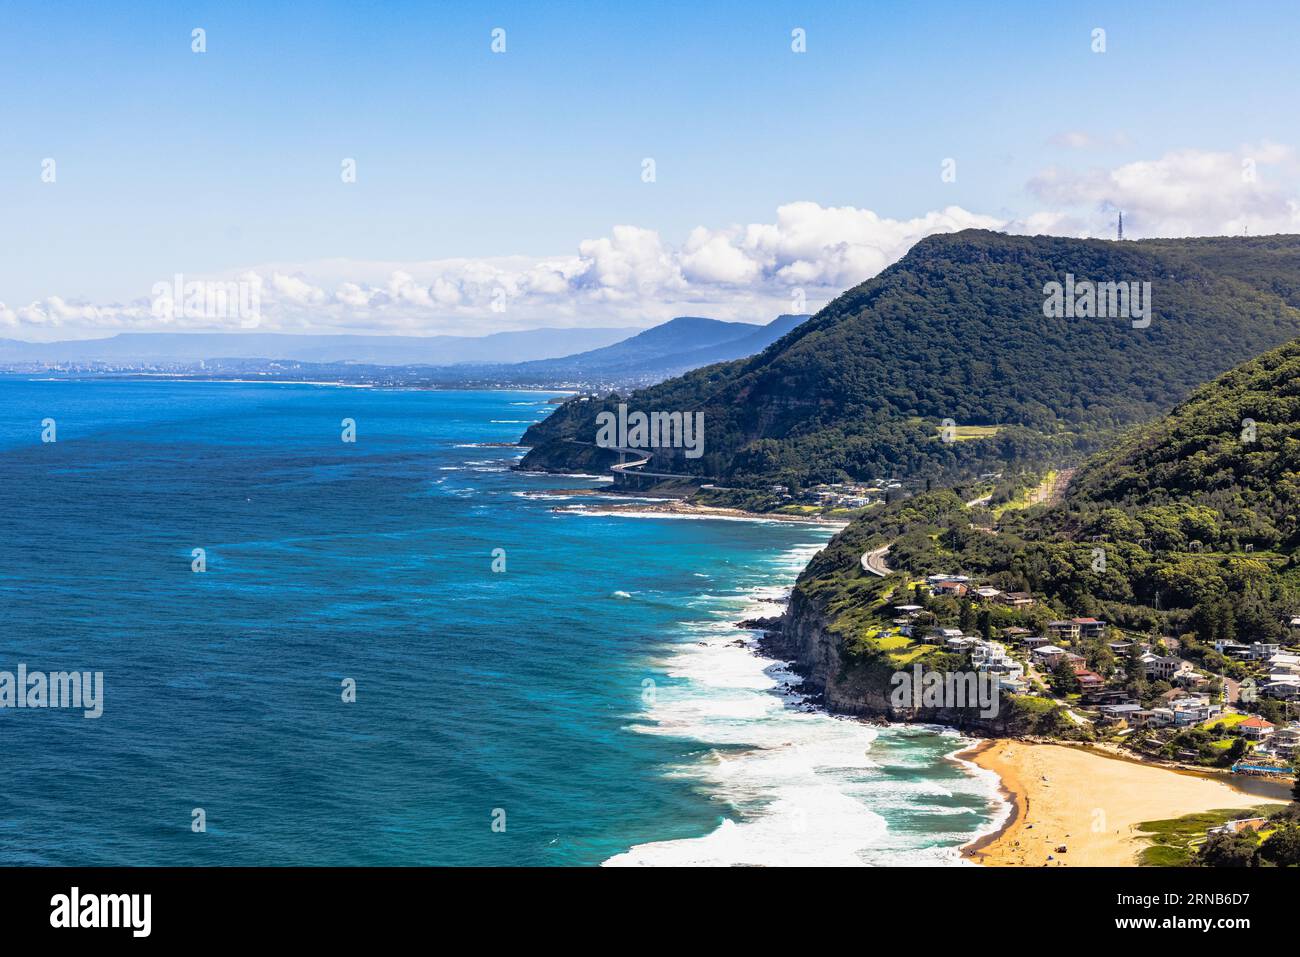 A stunning aerial view of the idyllic coastal scenery of Stanwell Tops in Australia Stock Photo